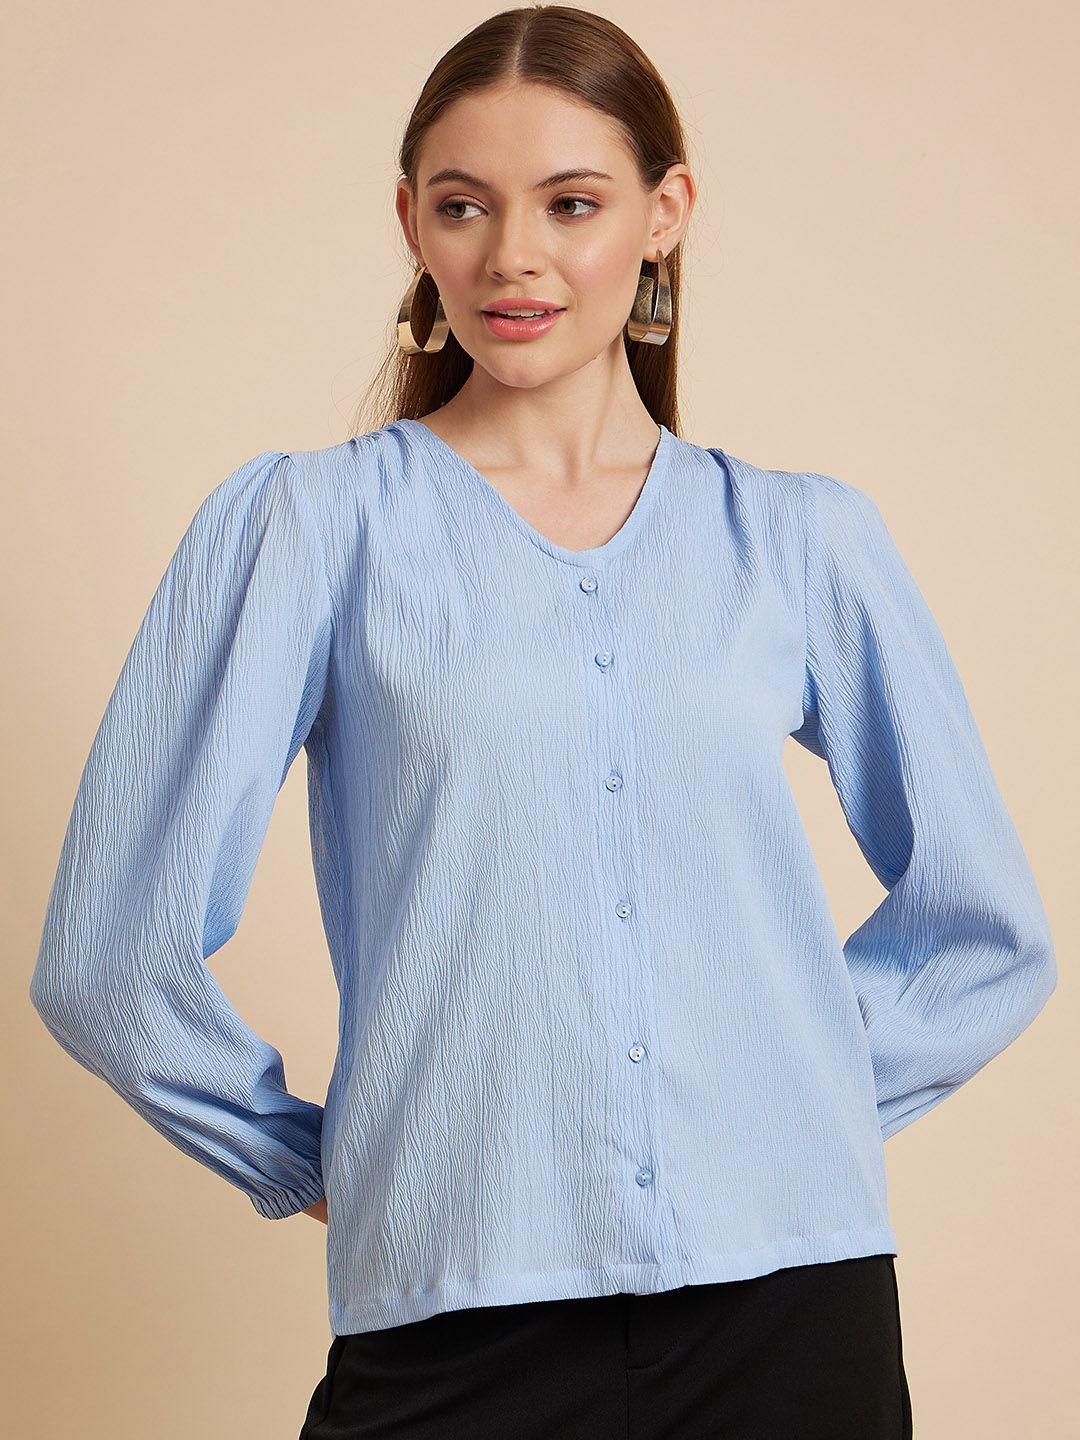 mint-street-v-neck-puff-sleeves-crepe-shirt-style-top